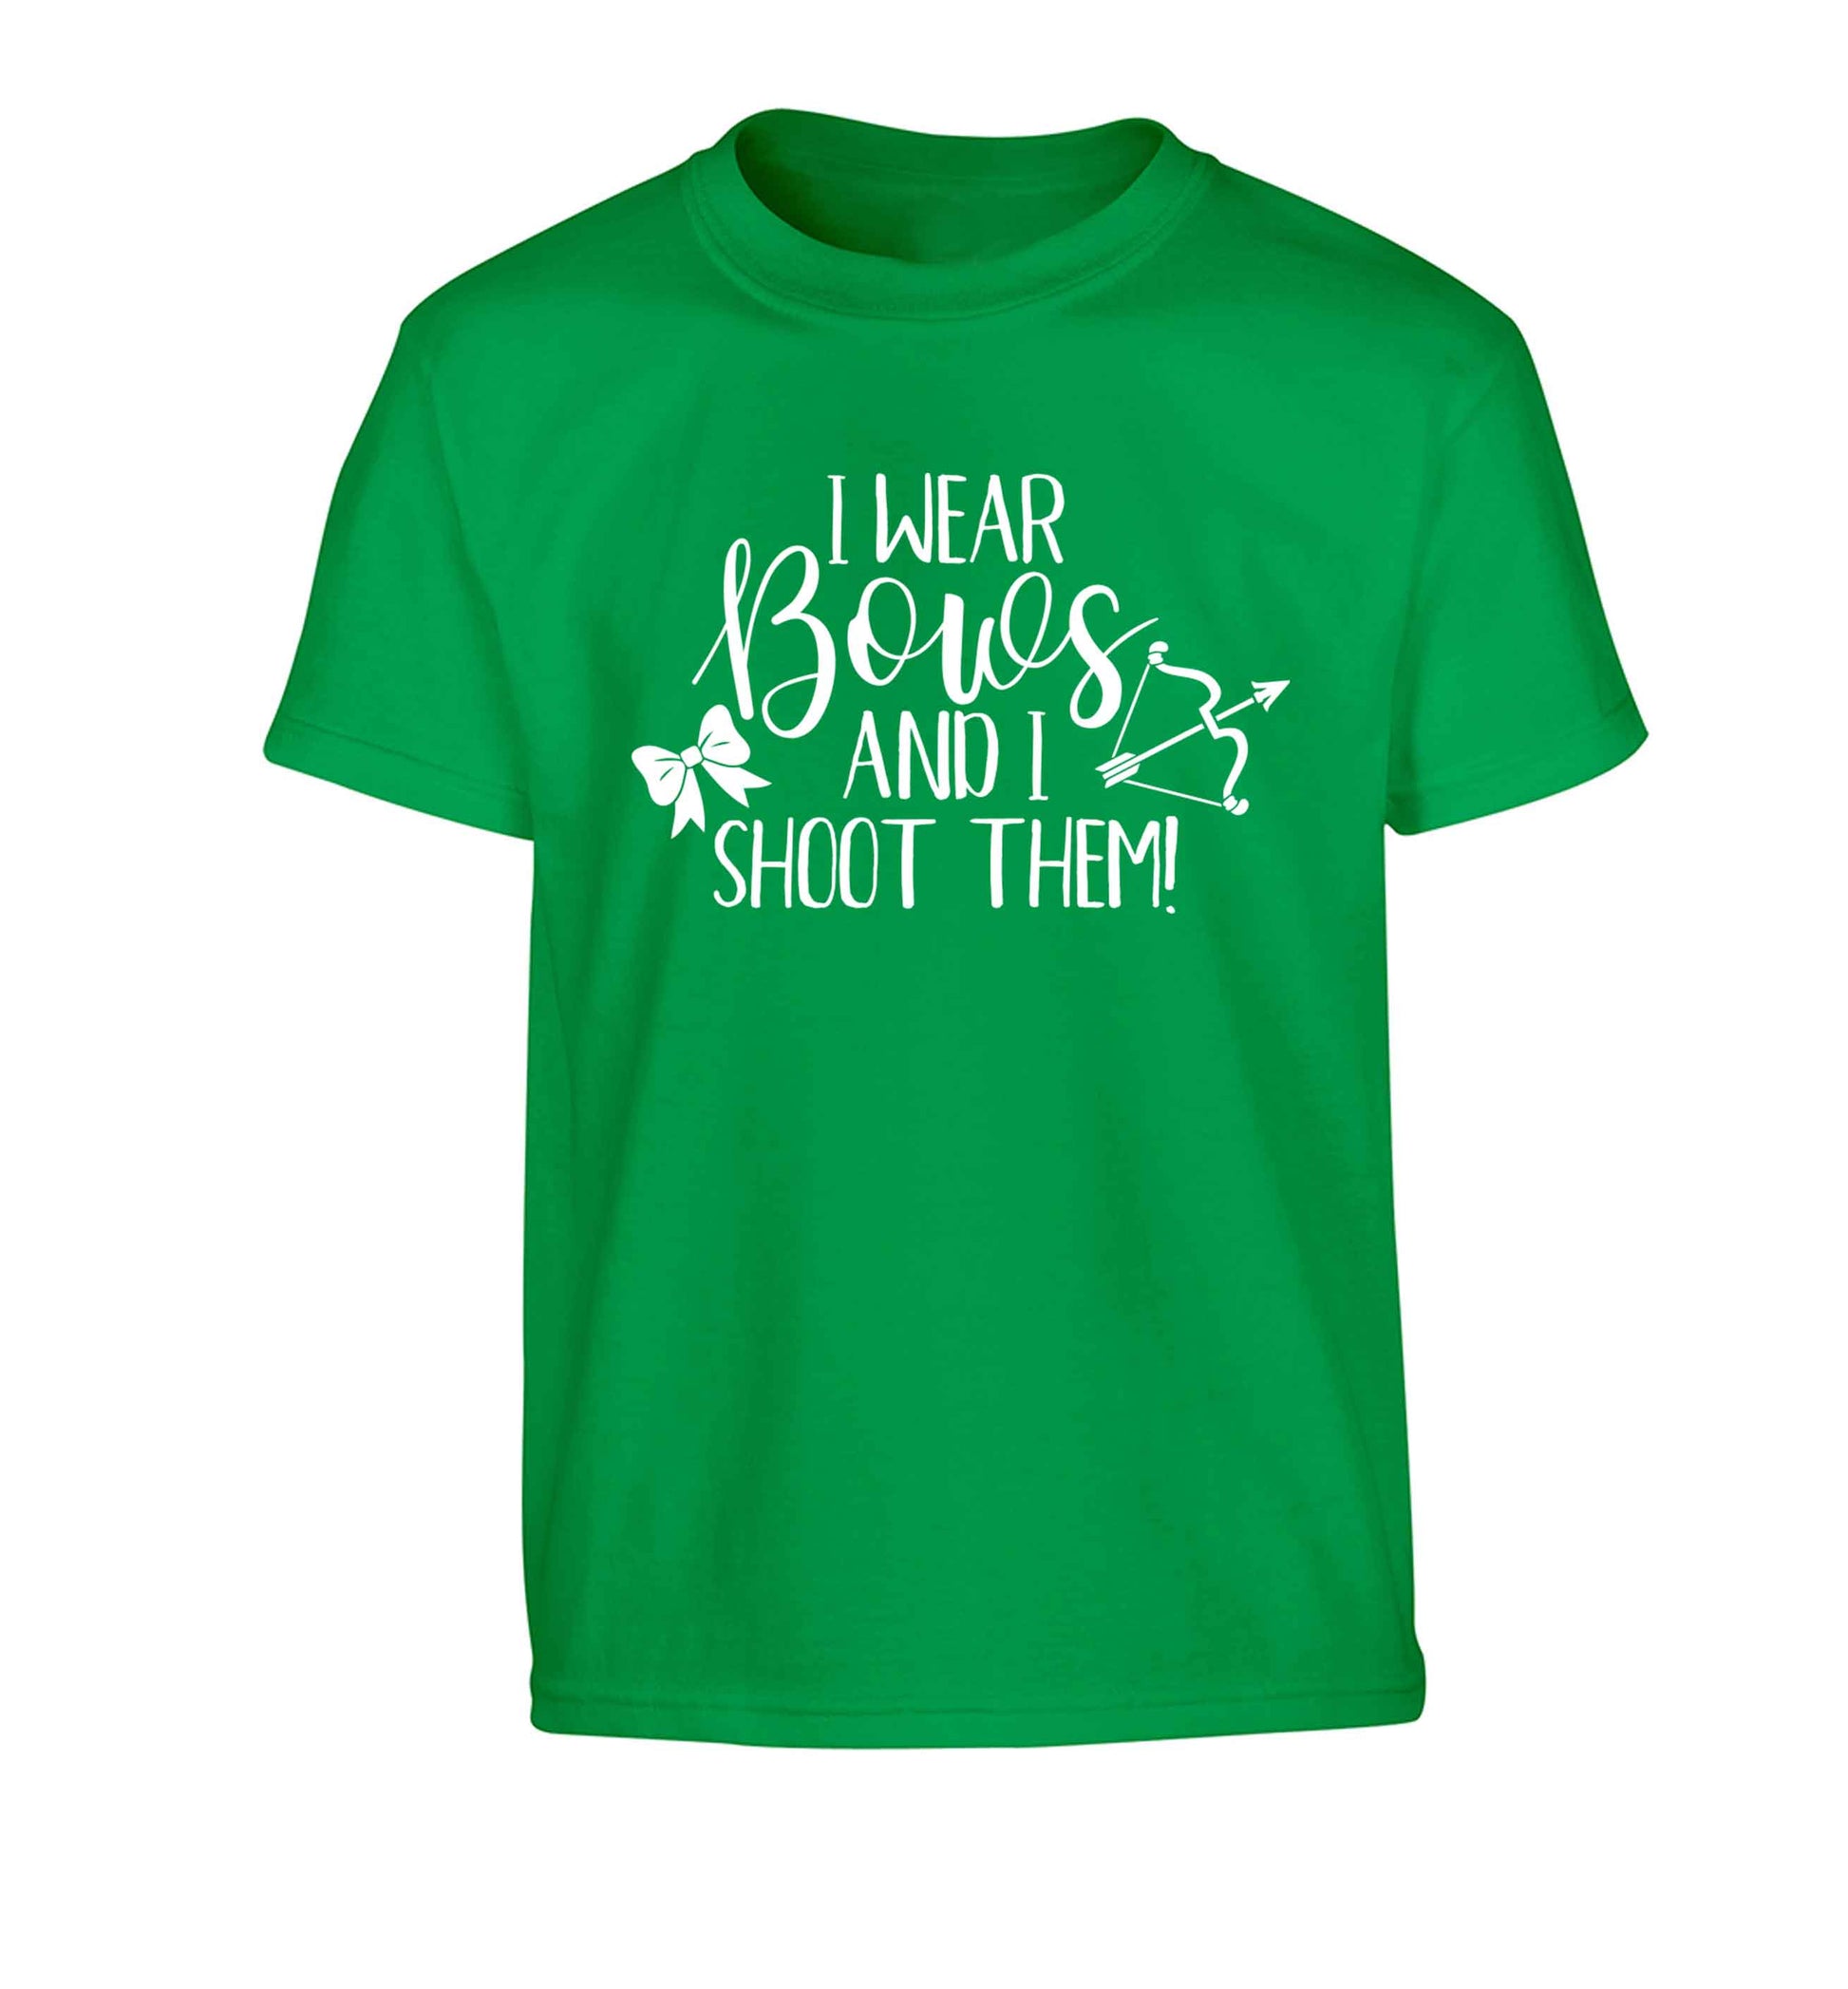 I wear bows and I shoot them Children's green Tshirt 12-13 Years